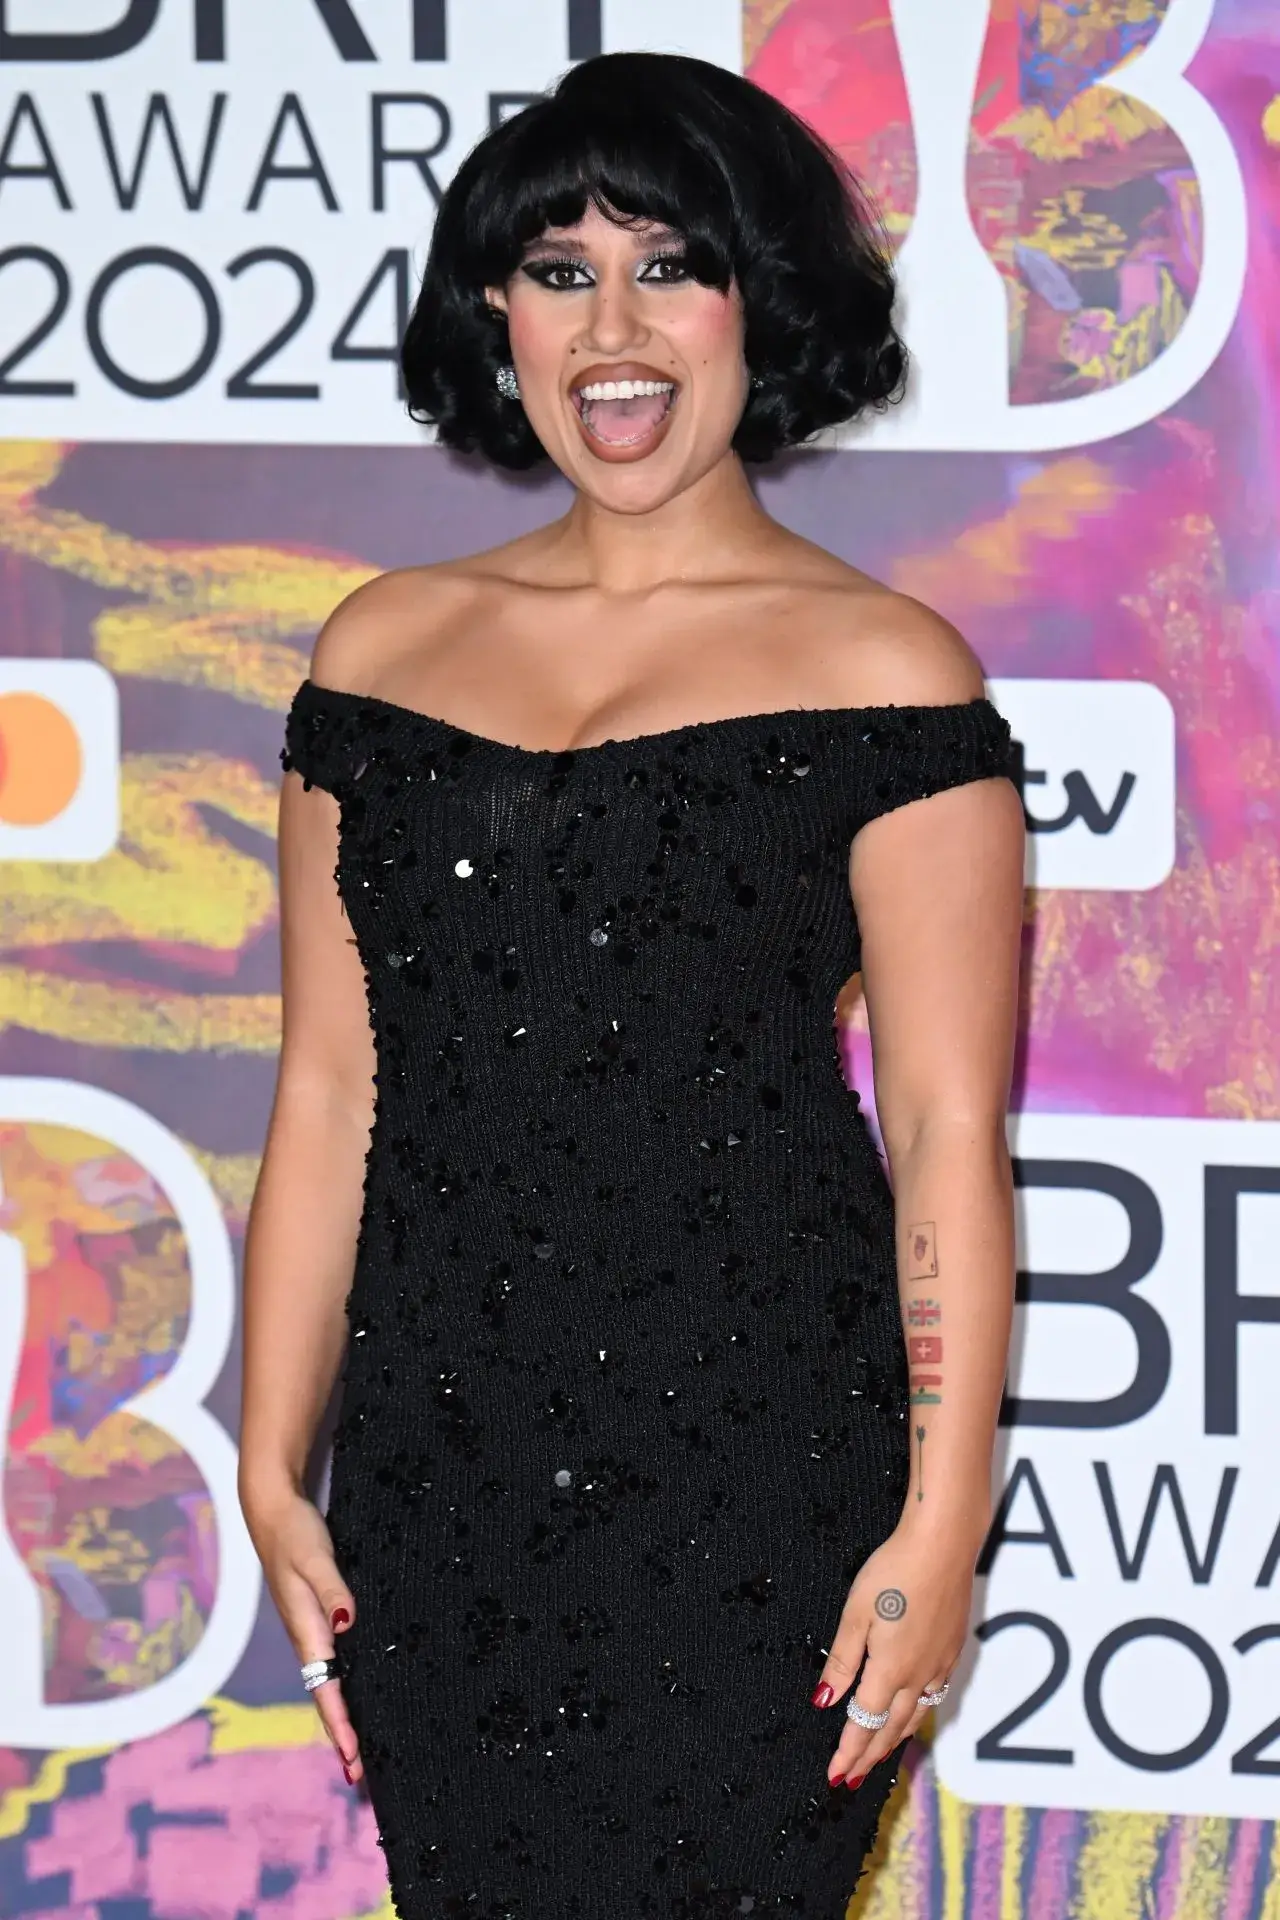 RAYE PHOTOSHOOT AT THE BRIT AWARDS 2024 IN LONDON